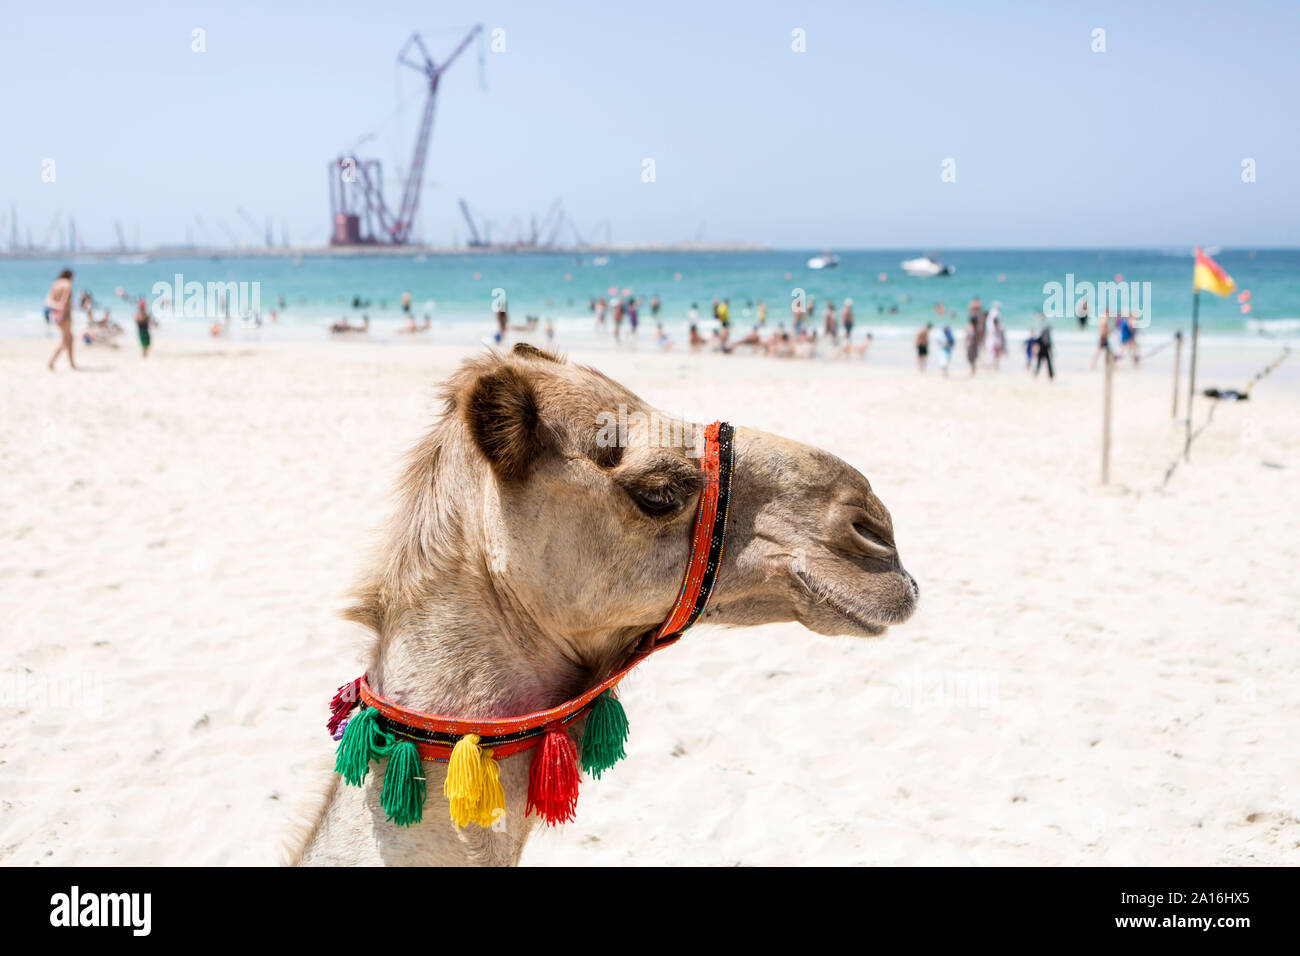 DUBAI - A camel for tourist rides on the beach at Dubai Marina. In the background the construction site of the world's largest ferris wheel. Stock Photo